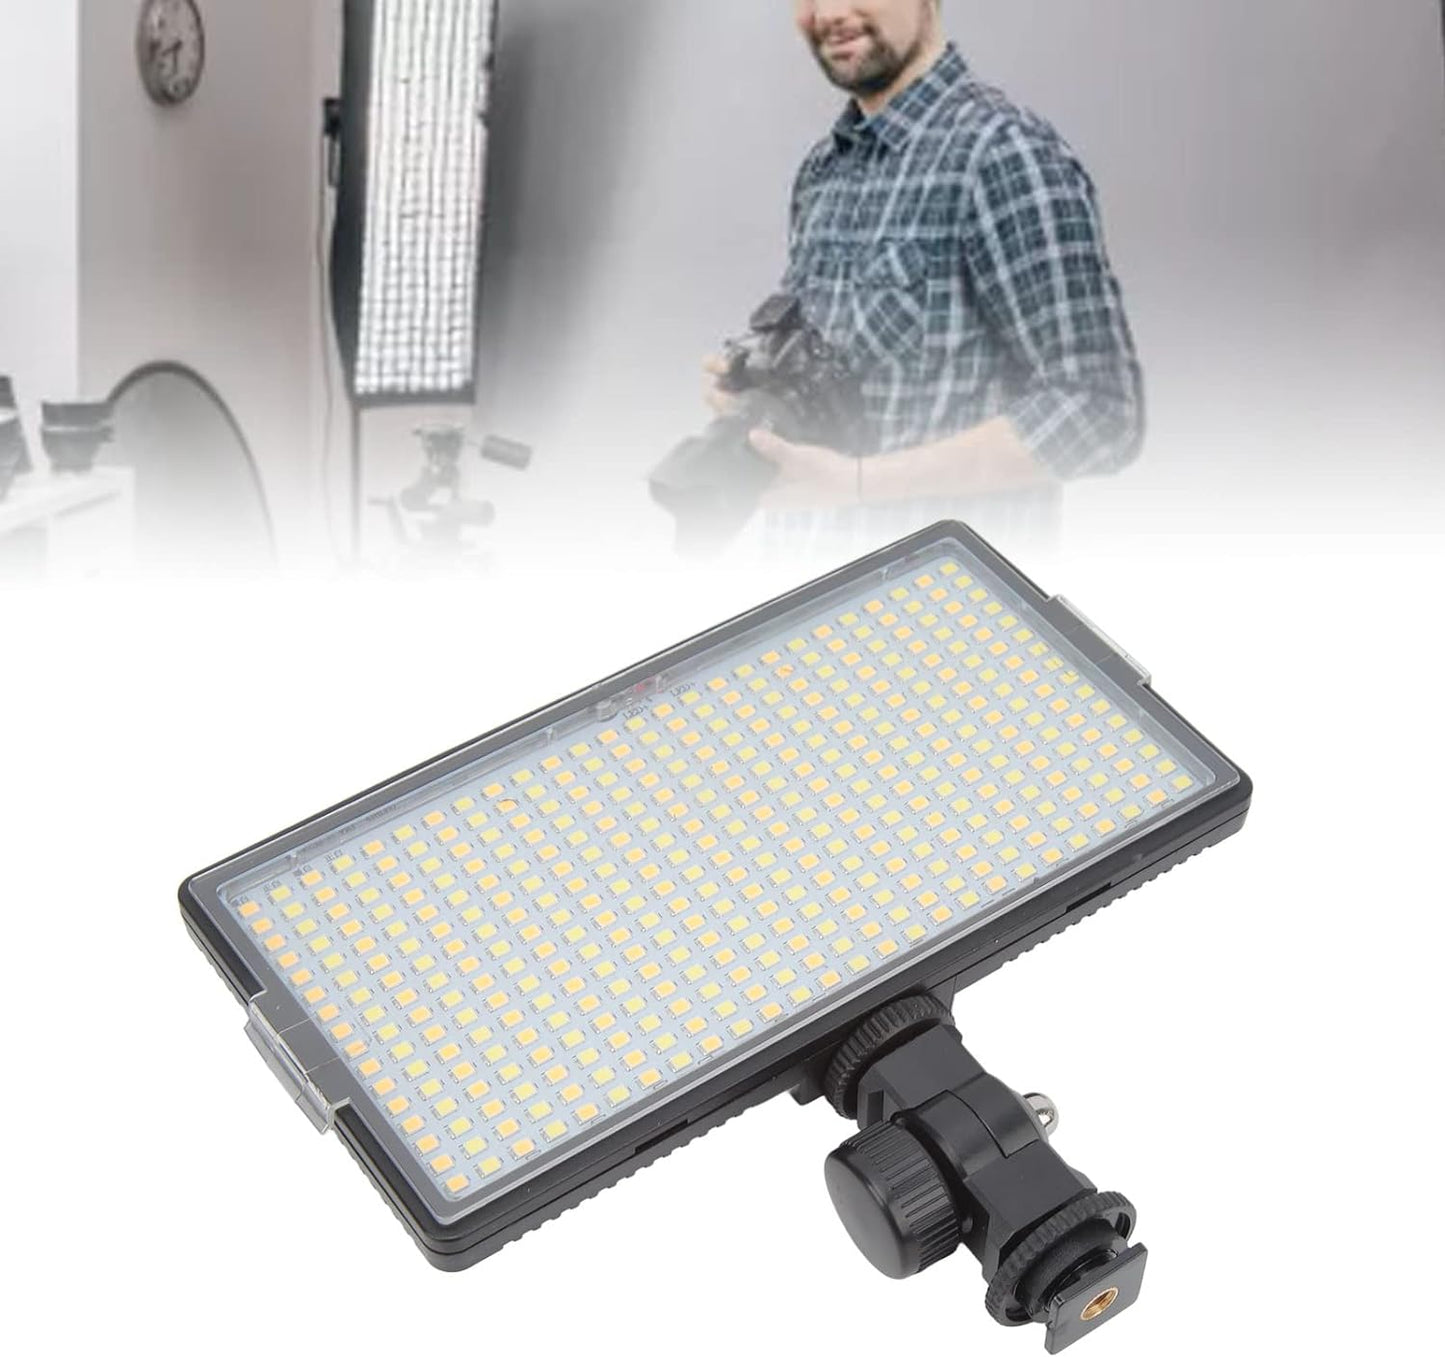 Multi Angle Adjustment Fill Light 416LED Video Light Compact and Convenient LED Fill Light for Photography and Live Streaming